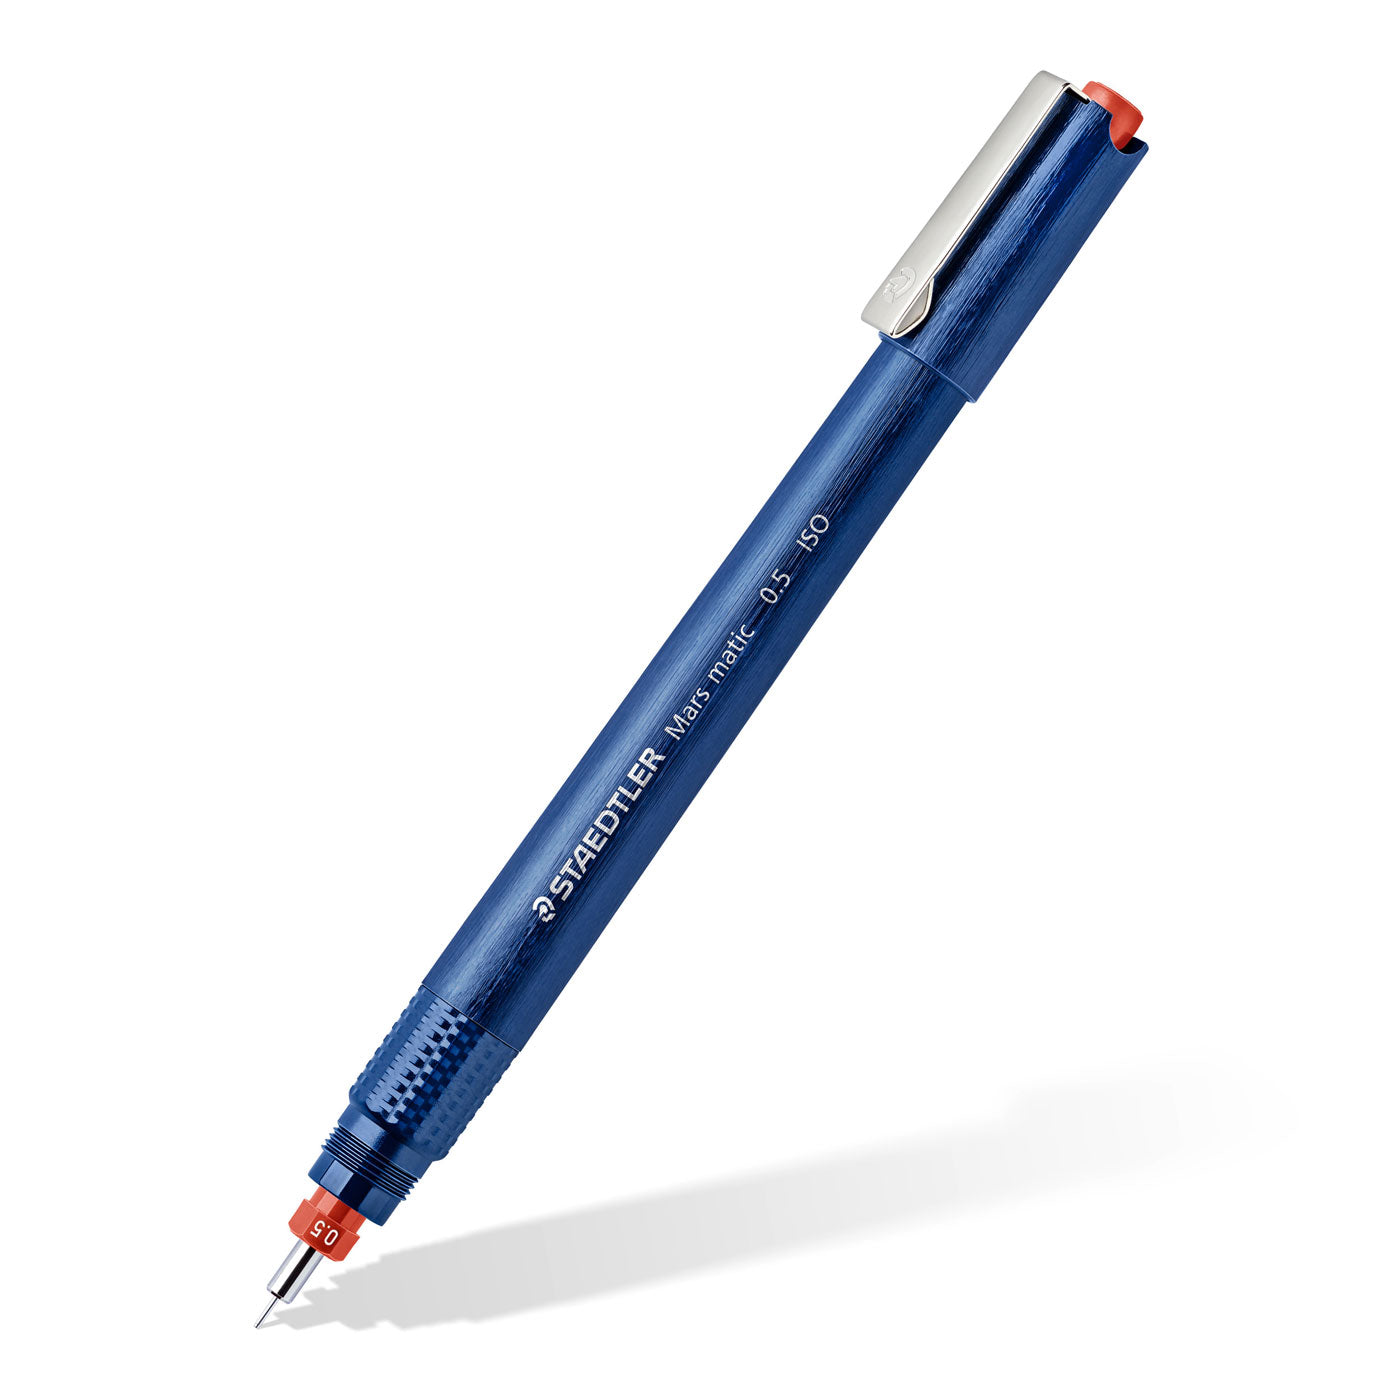 Staedtler Mars Matic 700 M05 Technical Drawing Pen 0.5mm